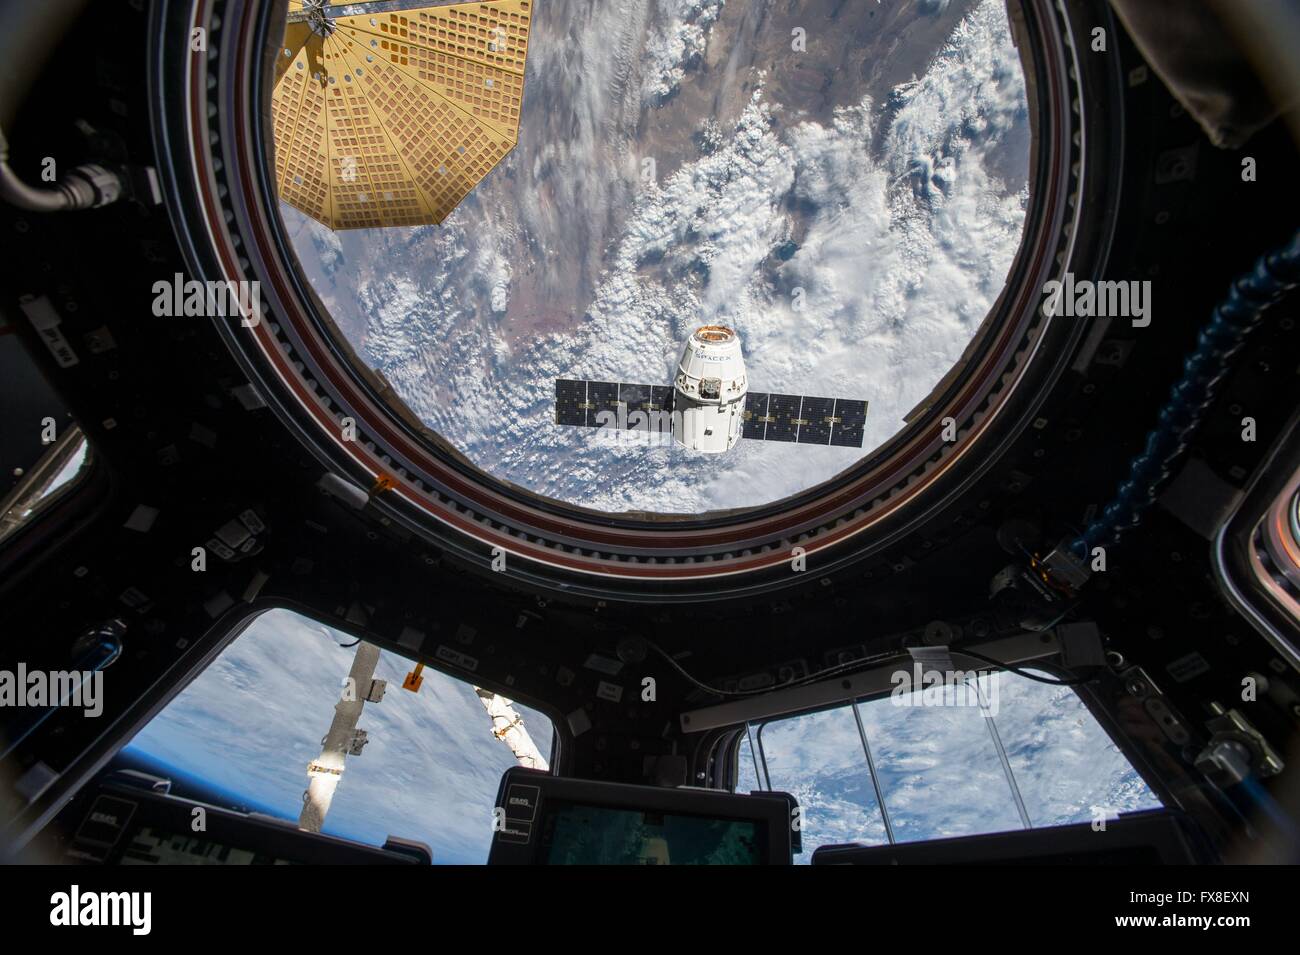 The SpaceX Dragon commercial cargo craft approaches the International Space Station for grapple and berthing seen from inside the Cupola module April 10, 2016 in Earth Orbit. The spacecraft is delivering 7,000 pounds of supplies, including the Bigelow Expandable Activity Module, known as BEAM. Stock Photo